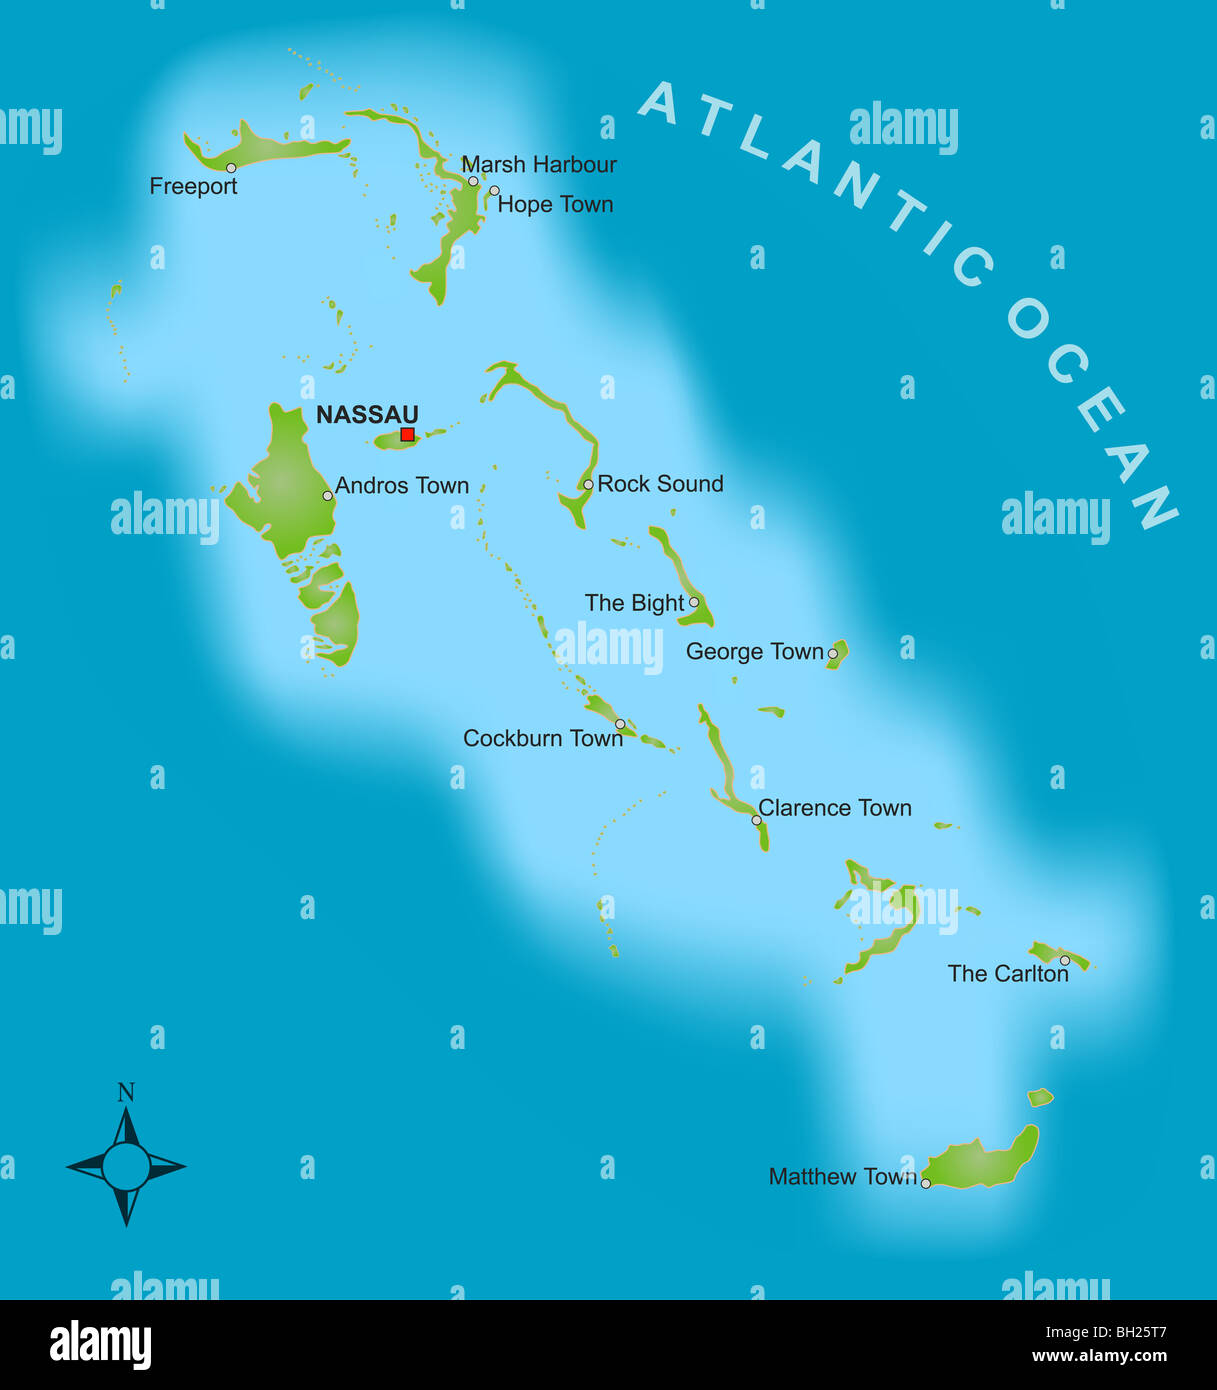 A stylized map showing the islands of Bahamas as well as several cities. Stock Photo